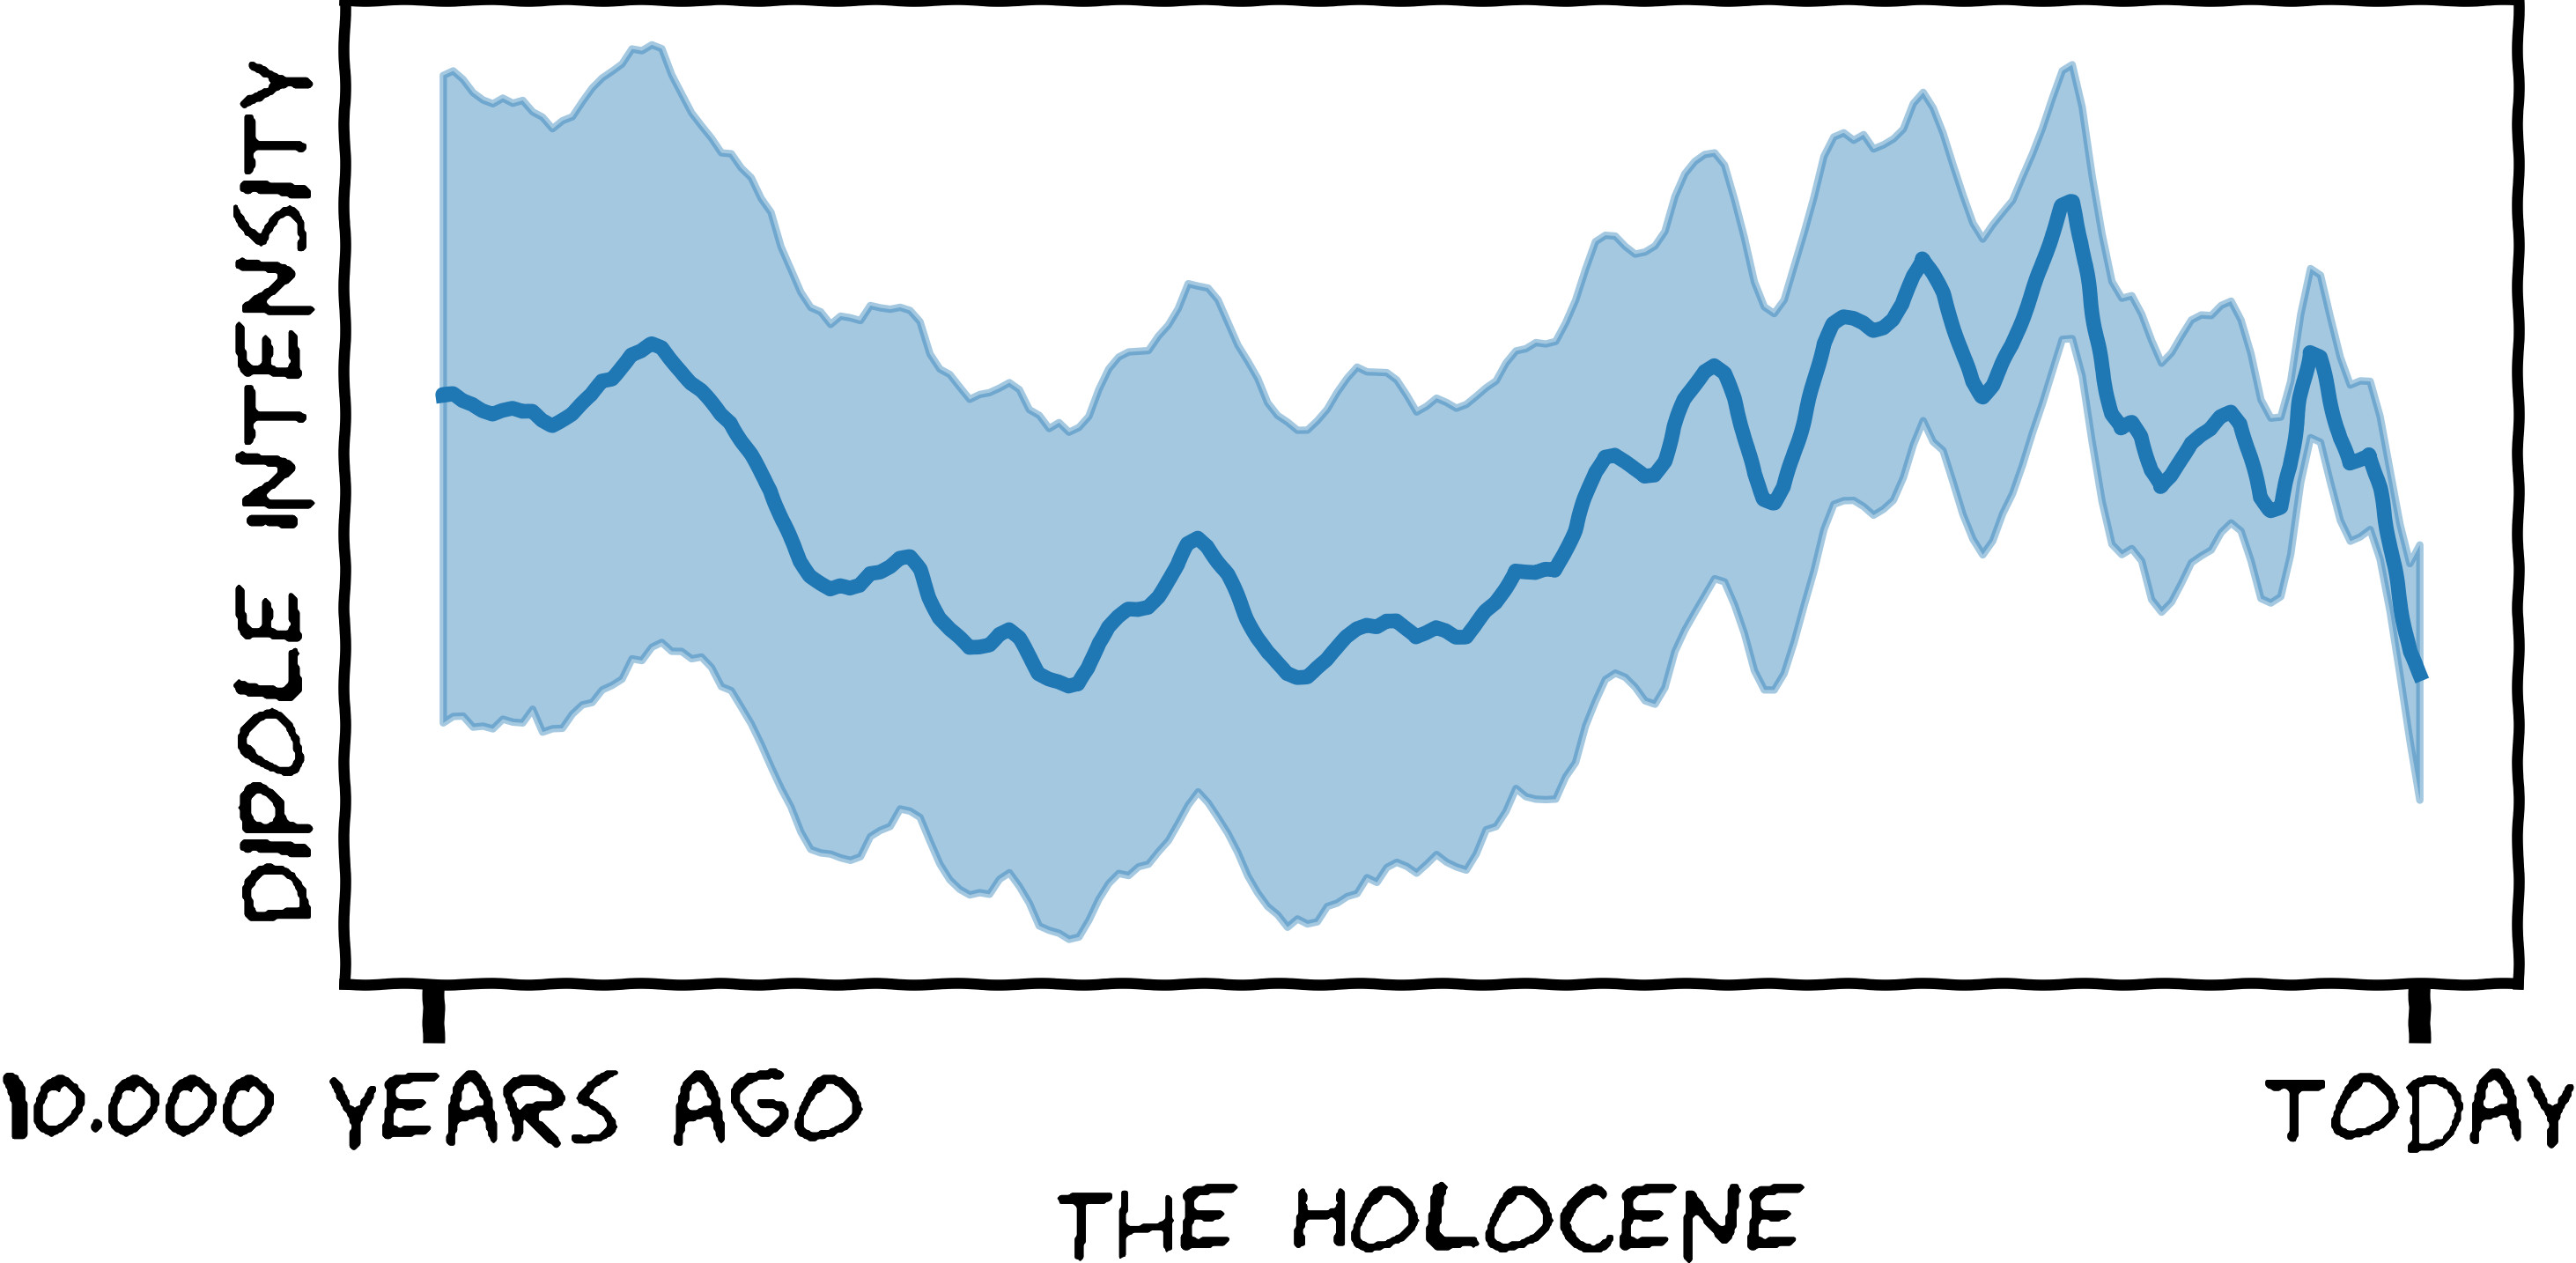 xkcd like figure showing the dipole moment over the holocene